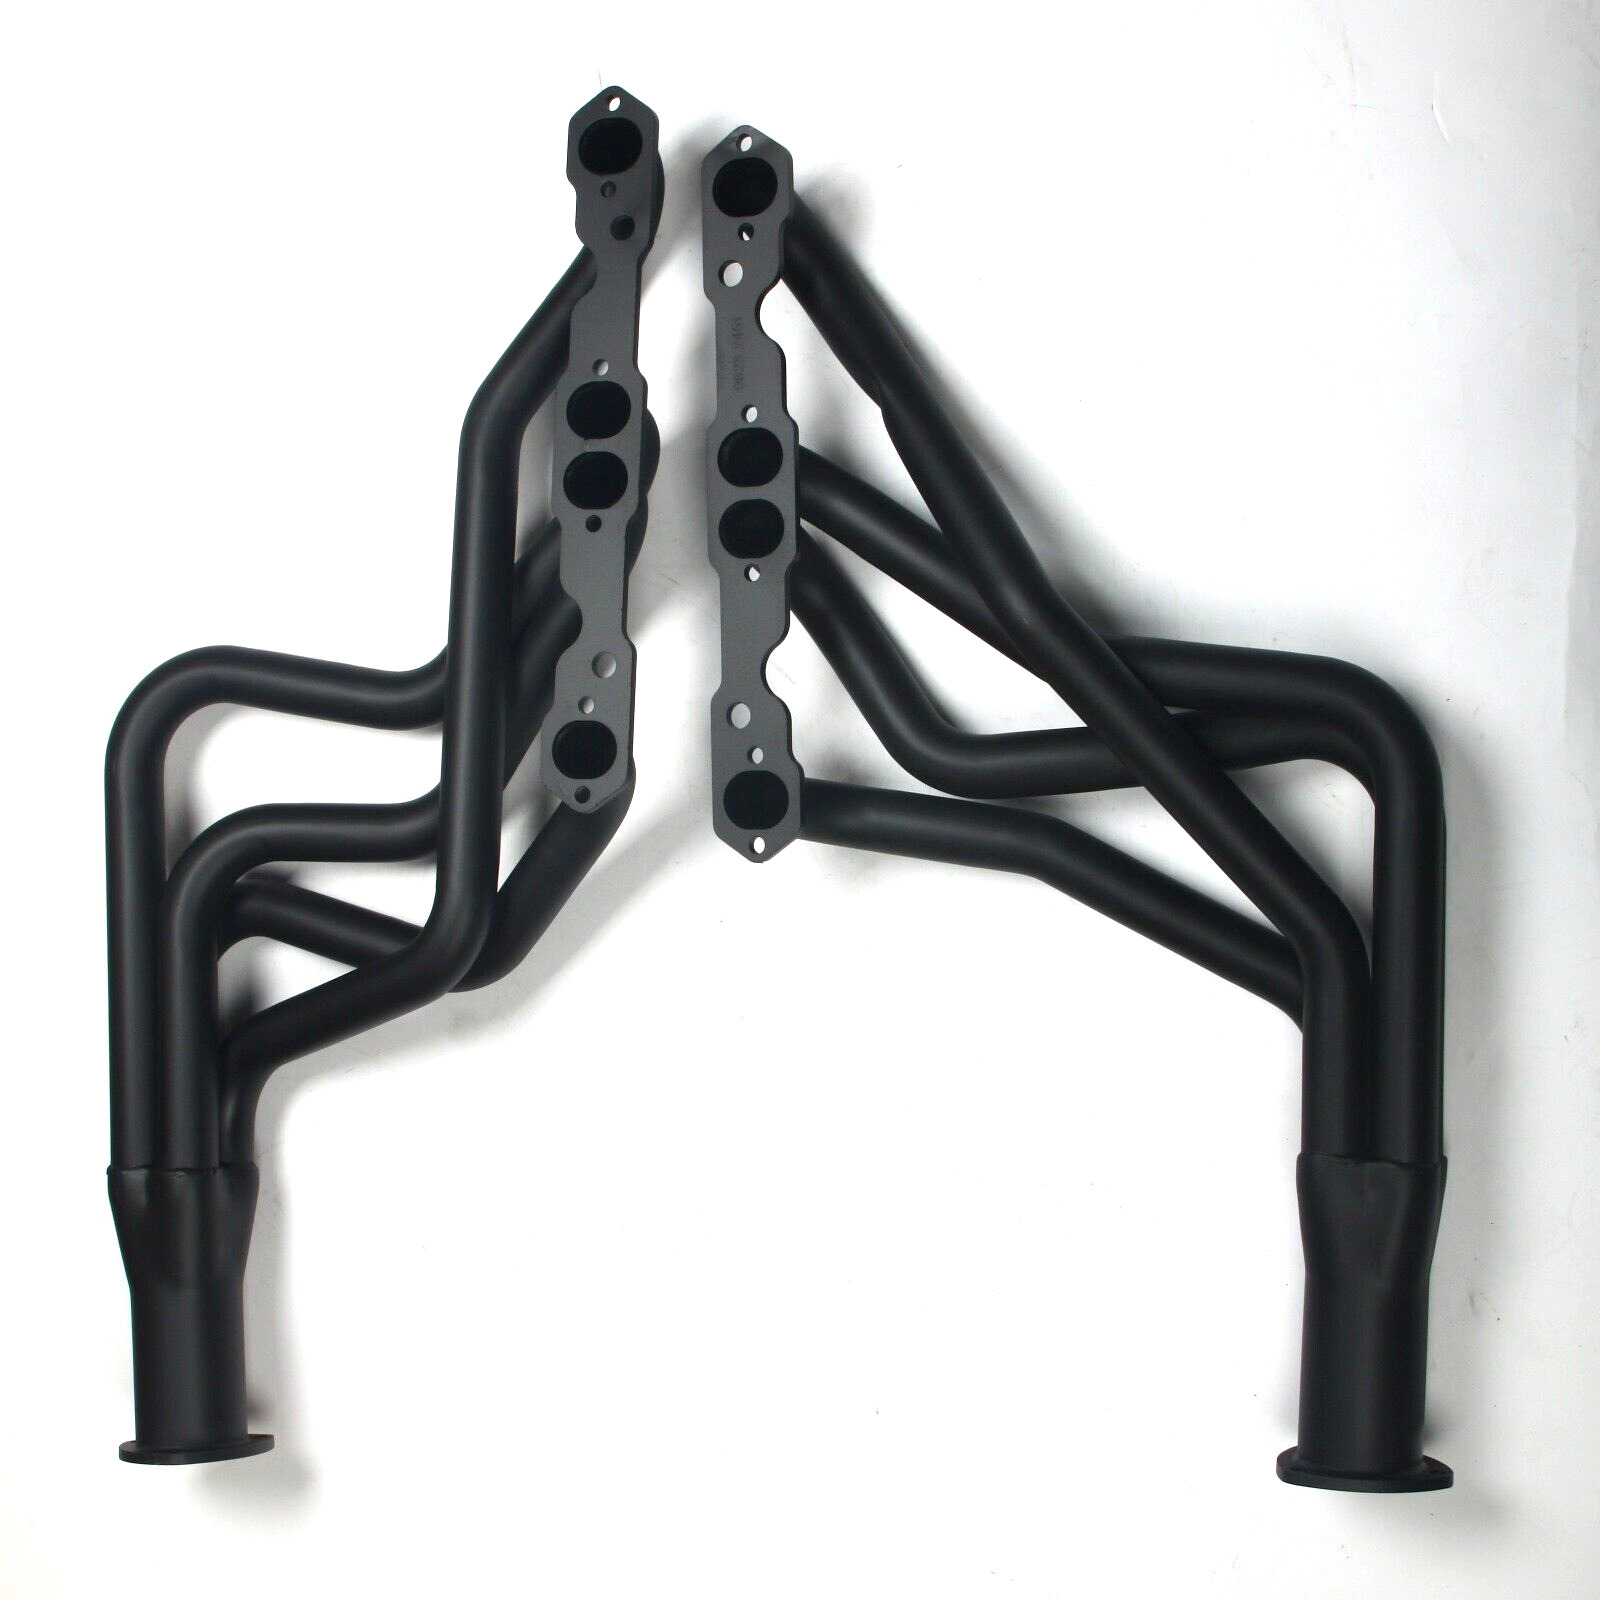 For CHEVELLE/El CAMINO MONTE CARLO NOVA LONG TUBE HEADERS PAINTED COMPETITION